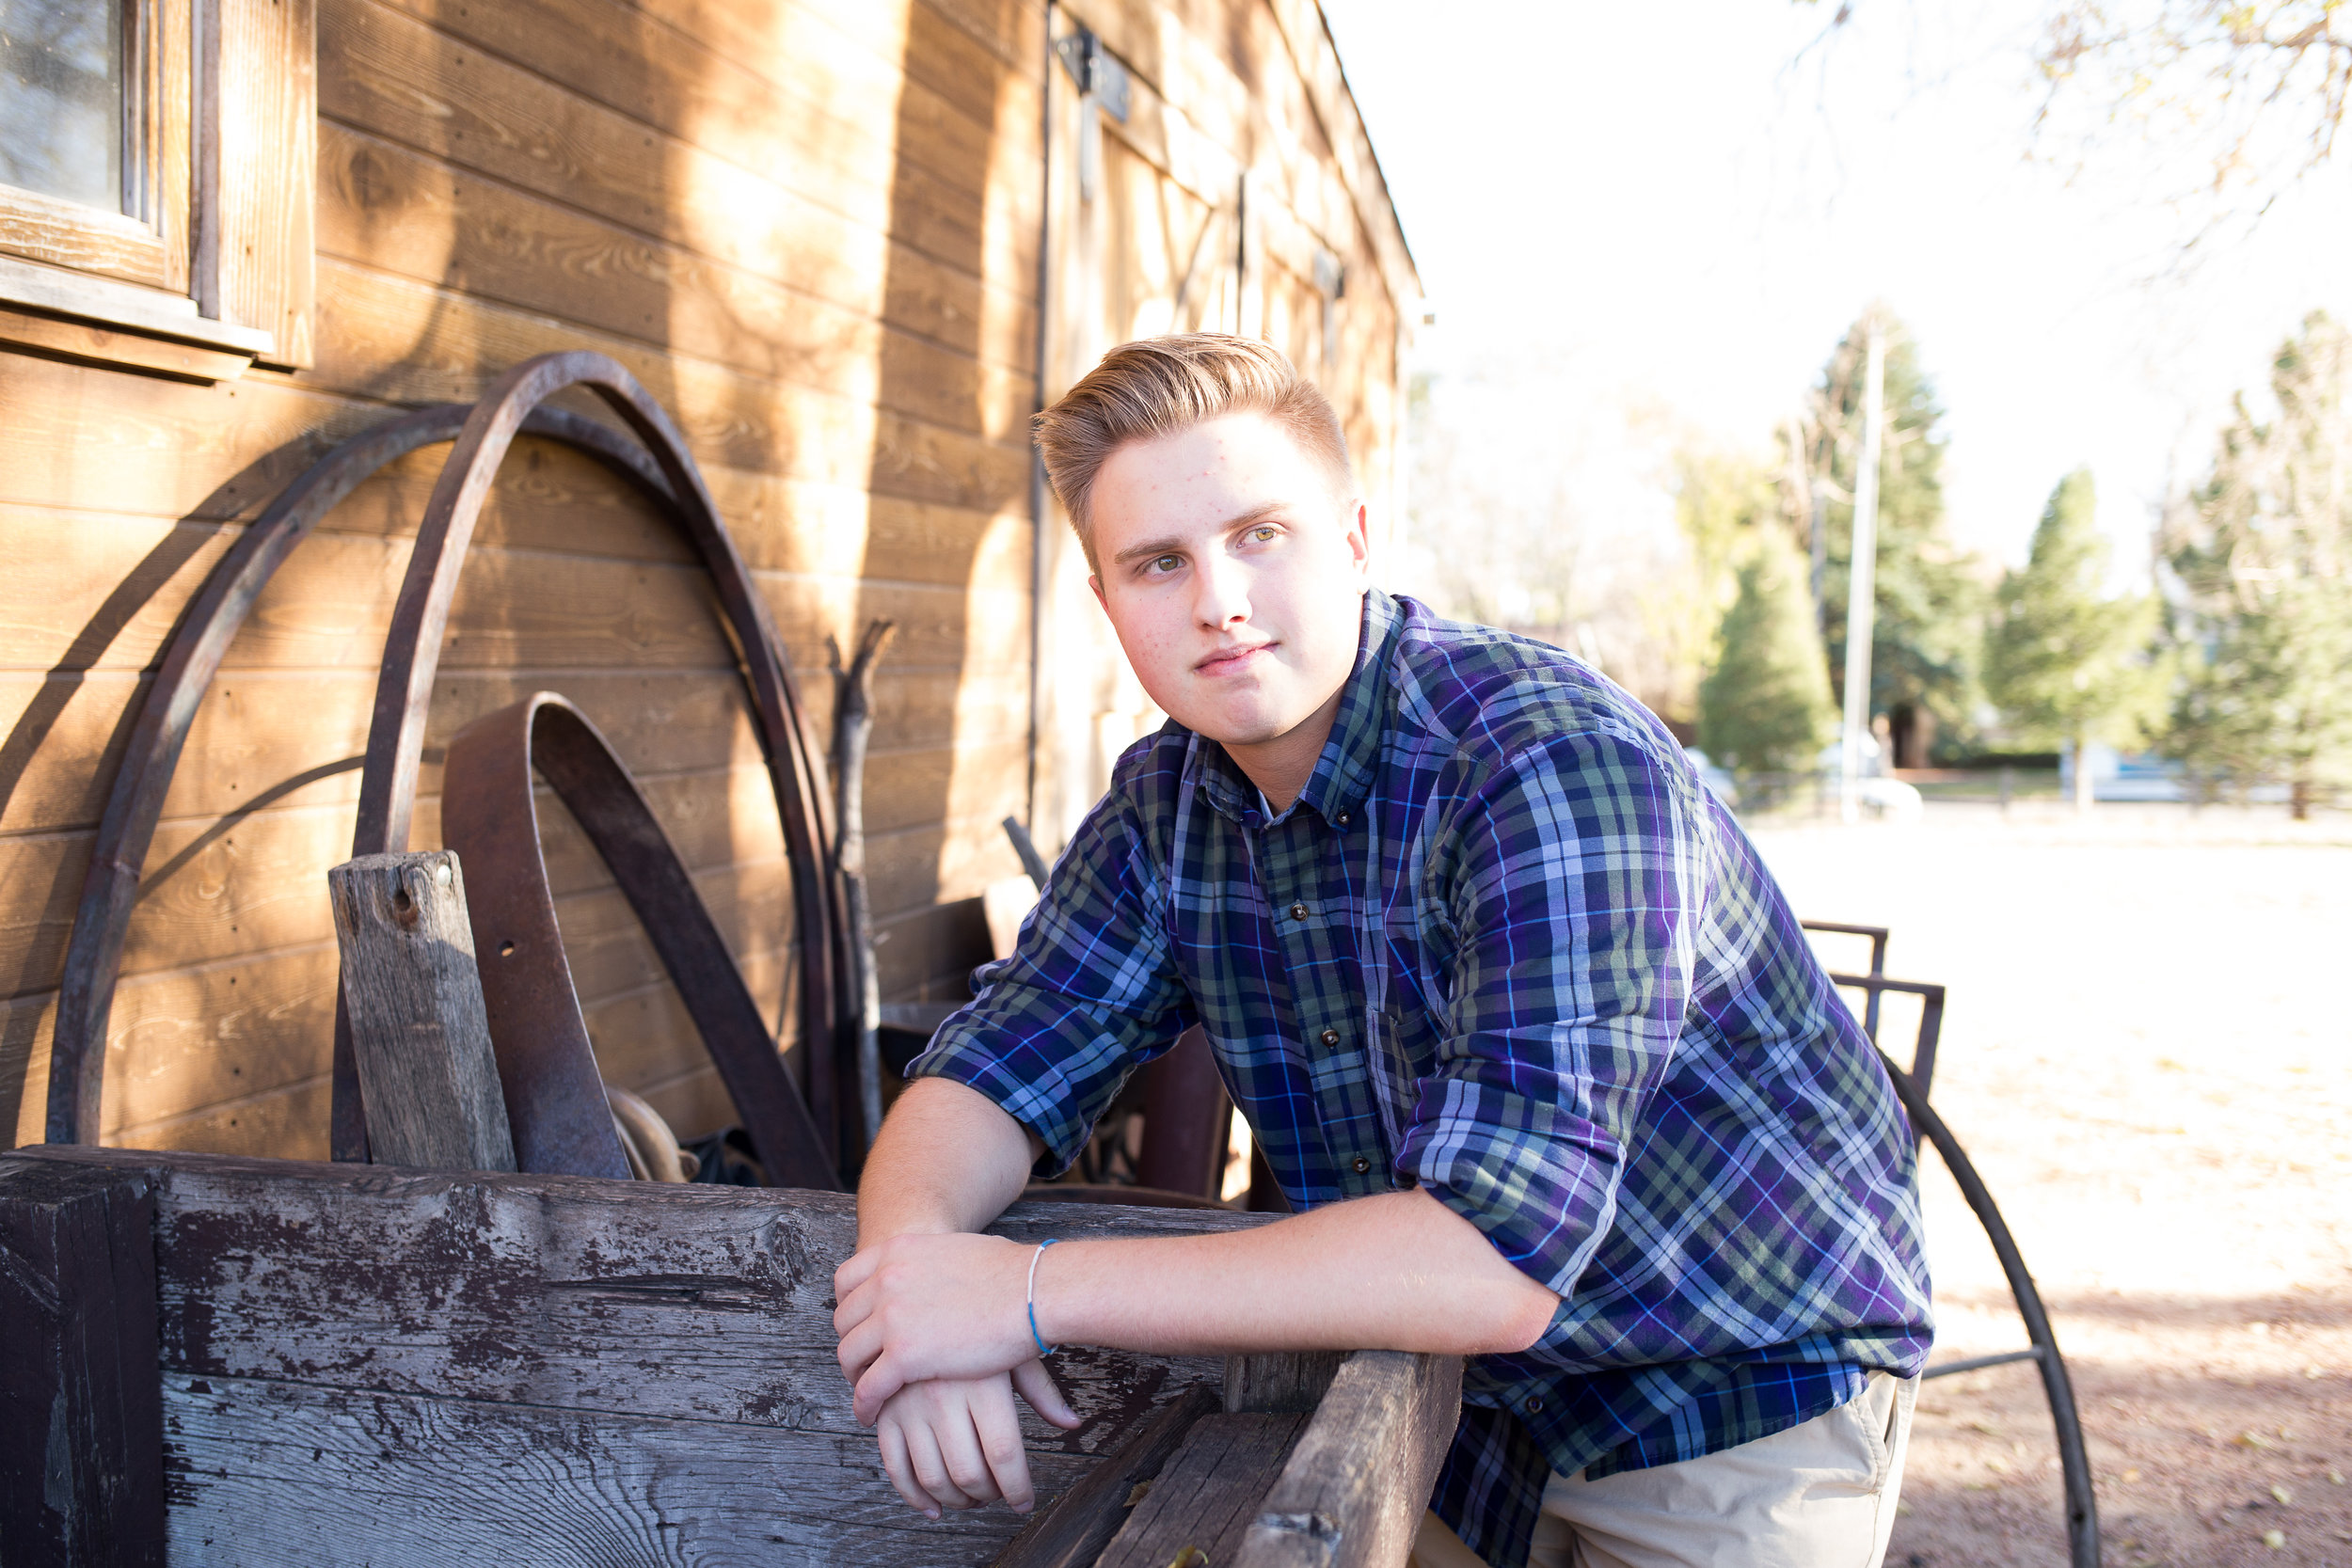 Senior session at Rock Ledge Ranch of St. Mary's boy leaning against crate and looking at camera Stacy Carosa Photography Colorado Springs